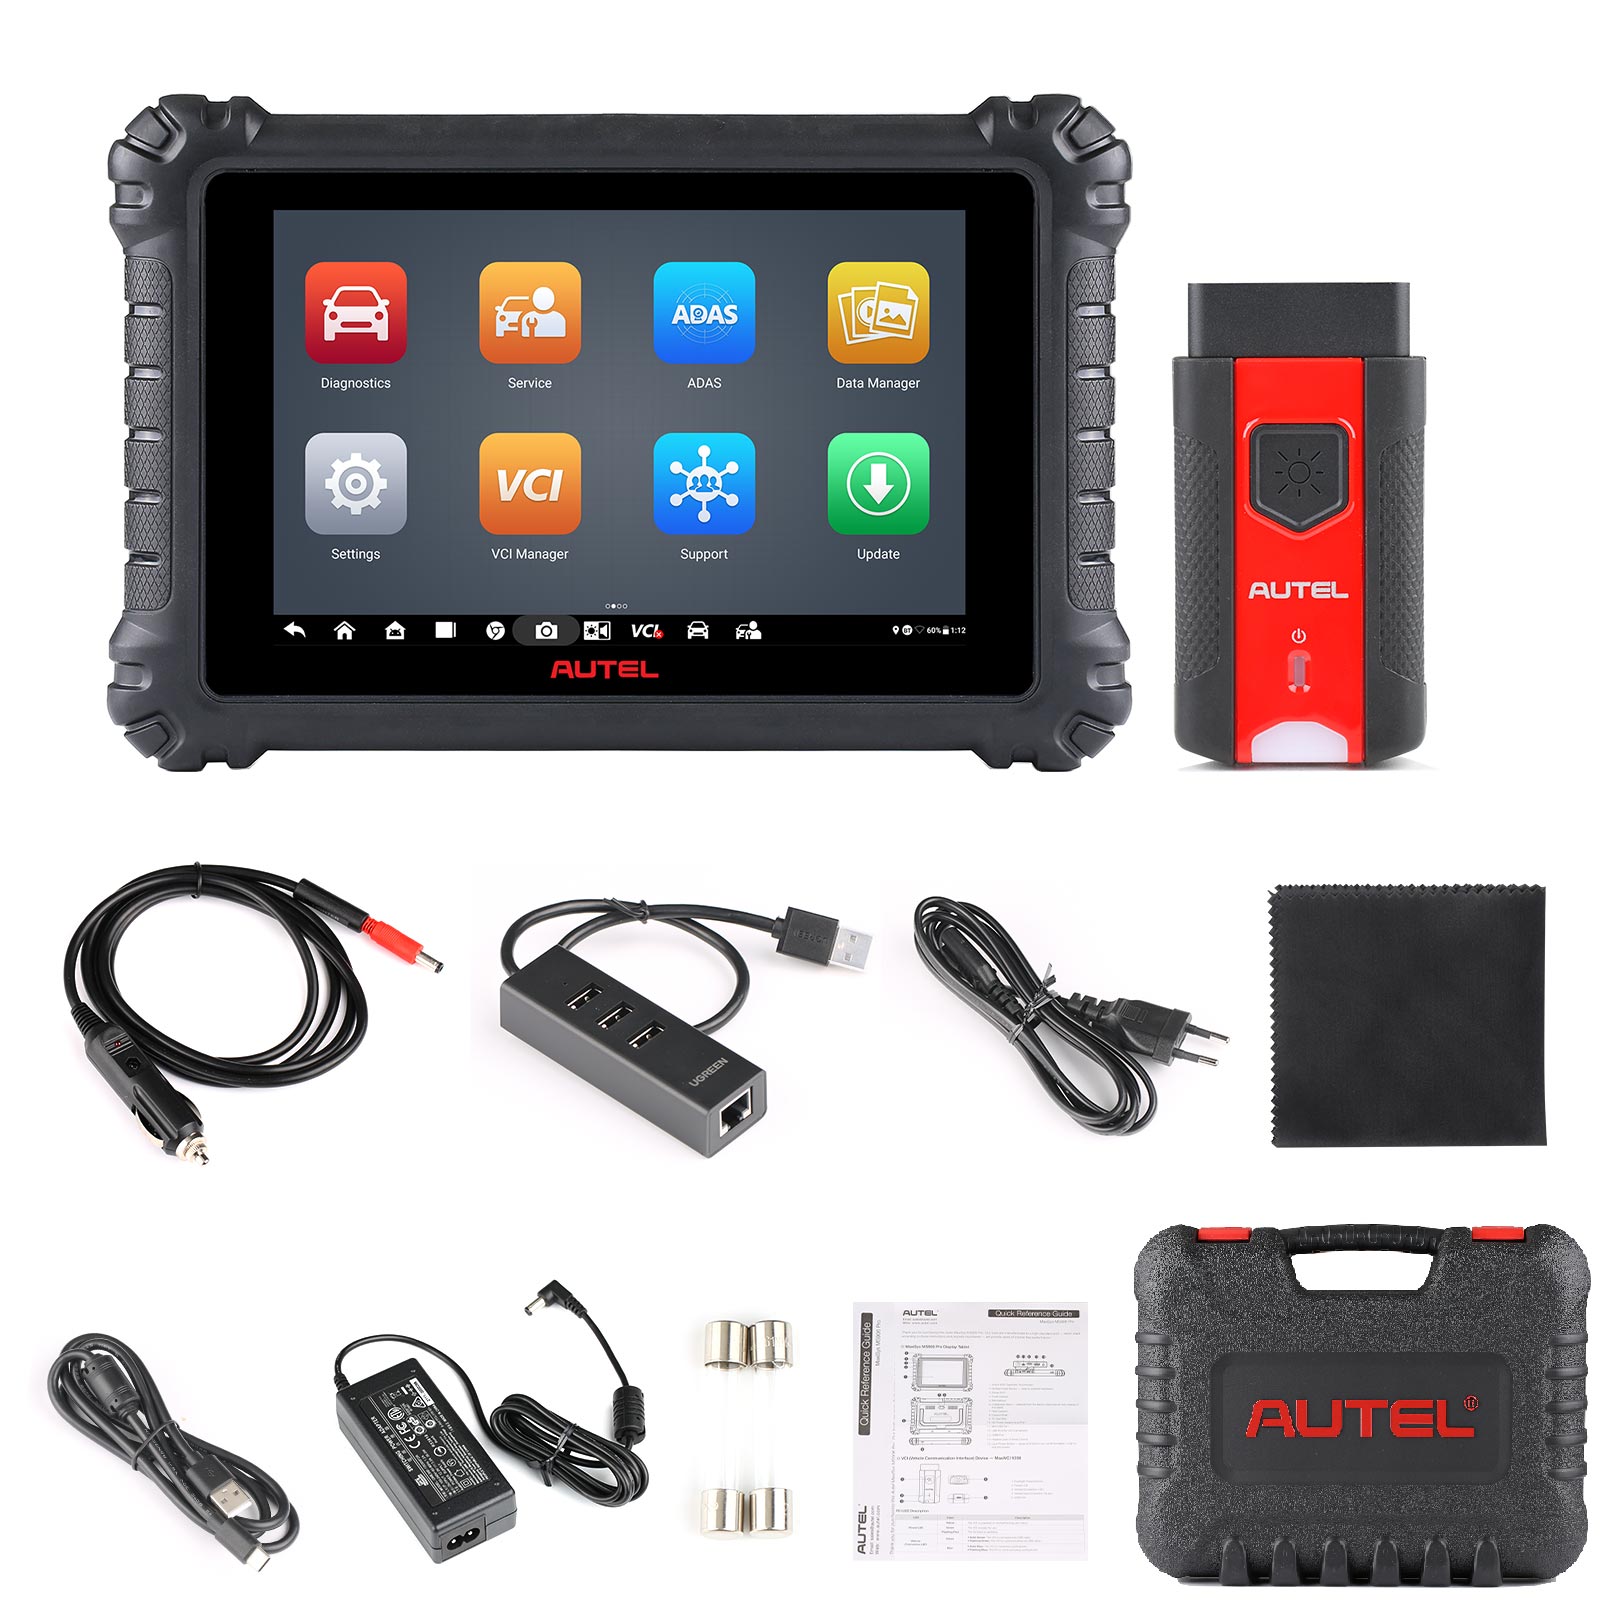 Autel MaxiSys MS906 Pro-TS Car Diagnostic Scan Tool, Complete TPMS